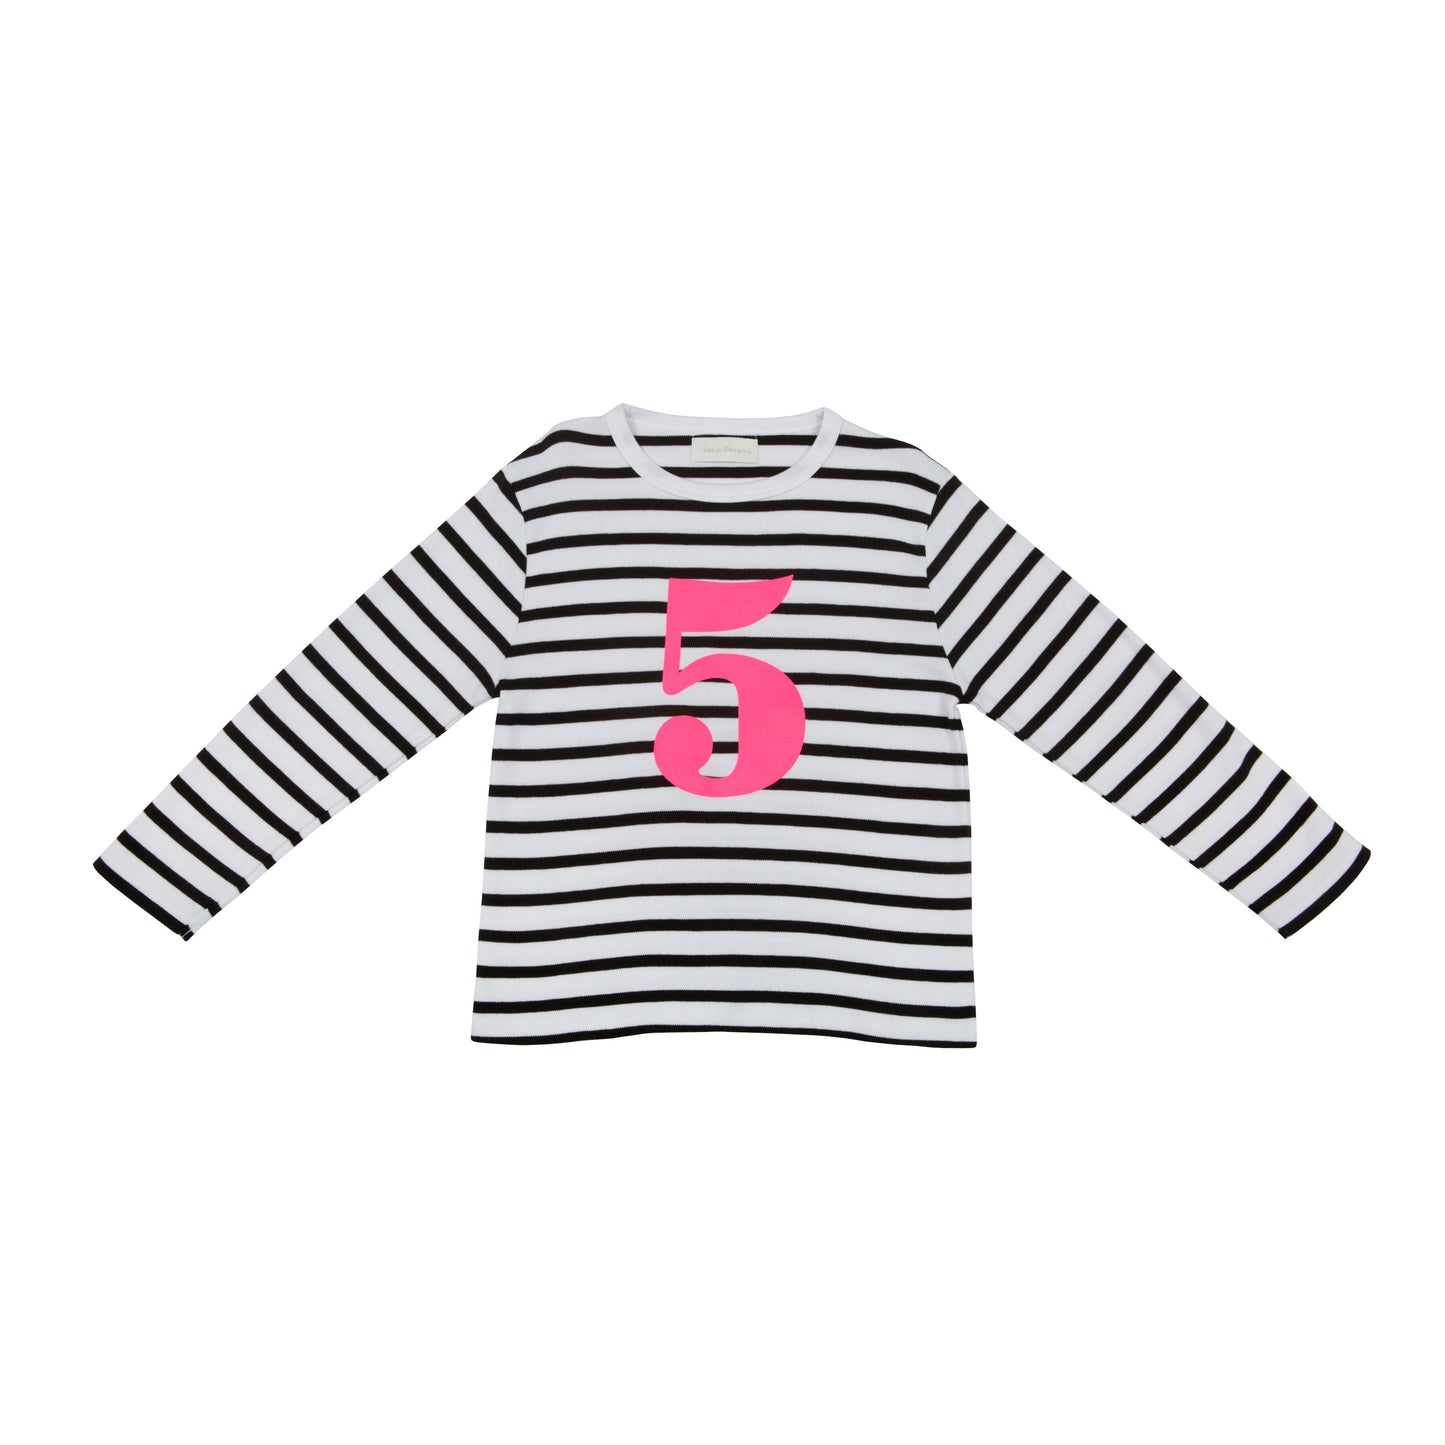 Bob & Blossom black and white striped long sleeved t shirt with hot pink number 5